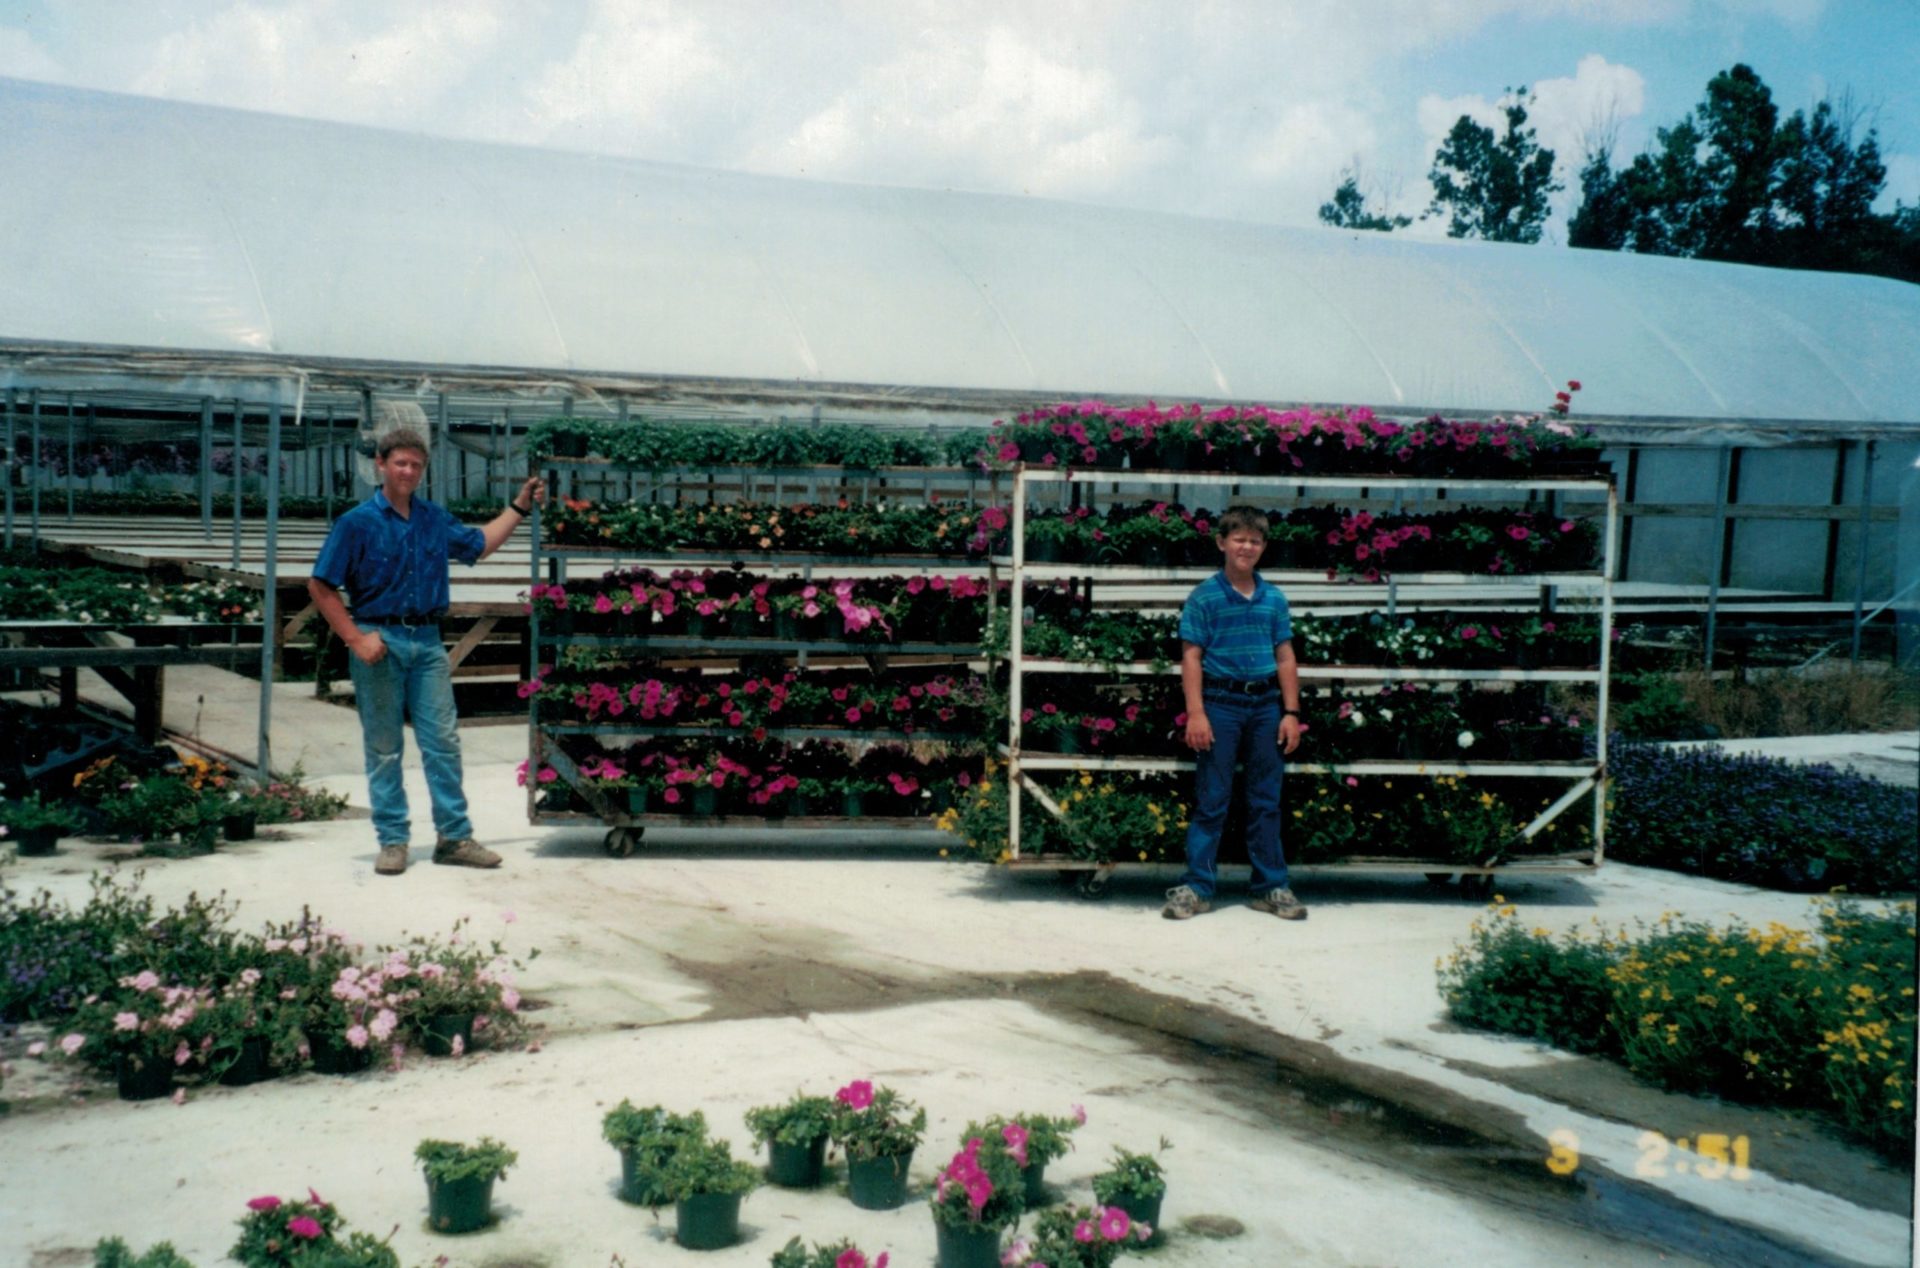 Lester and his younger brother next to rack of plants